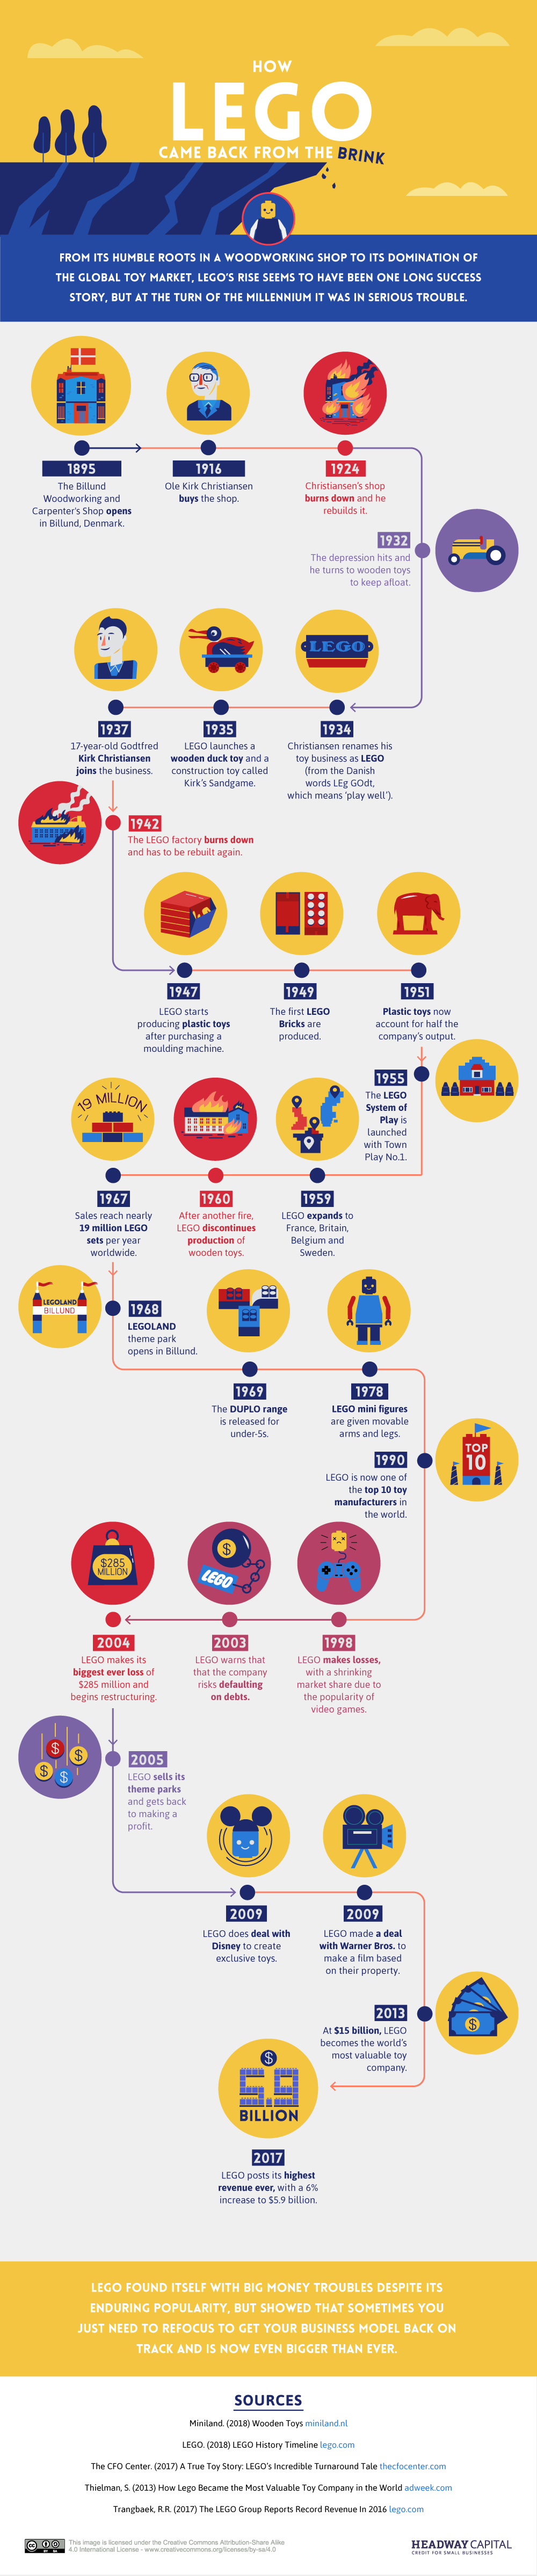 How LEGO came back from the brink [INFOGRAPHIC]